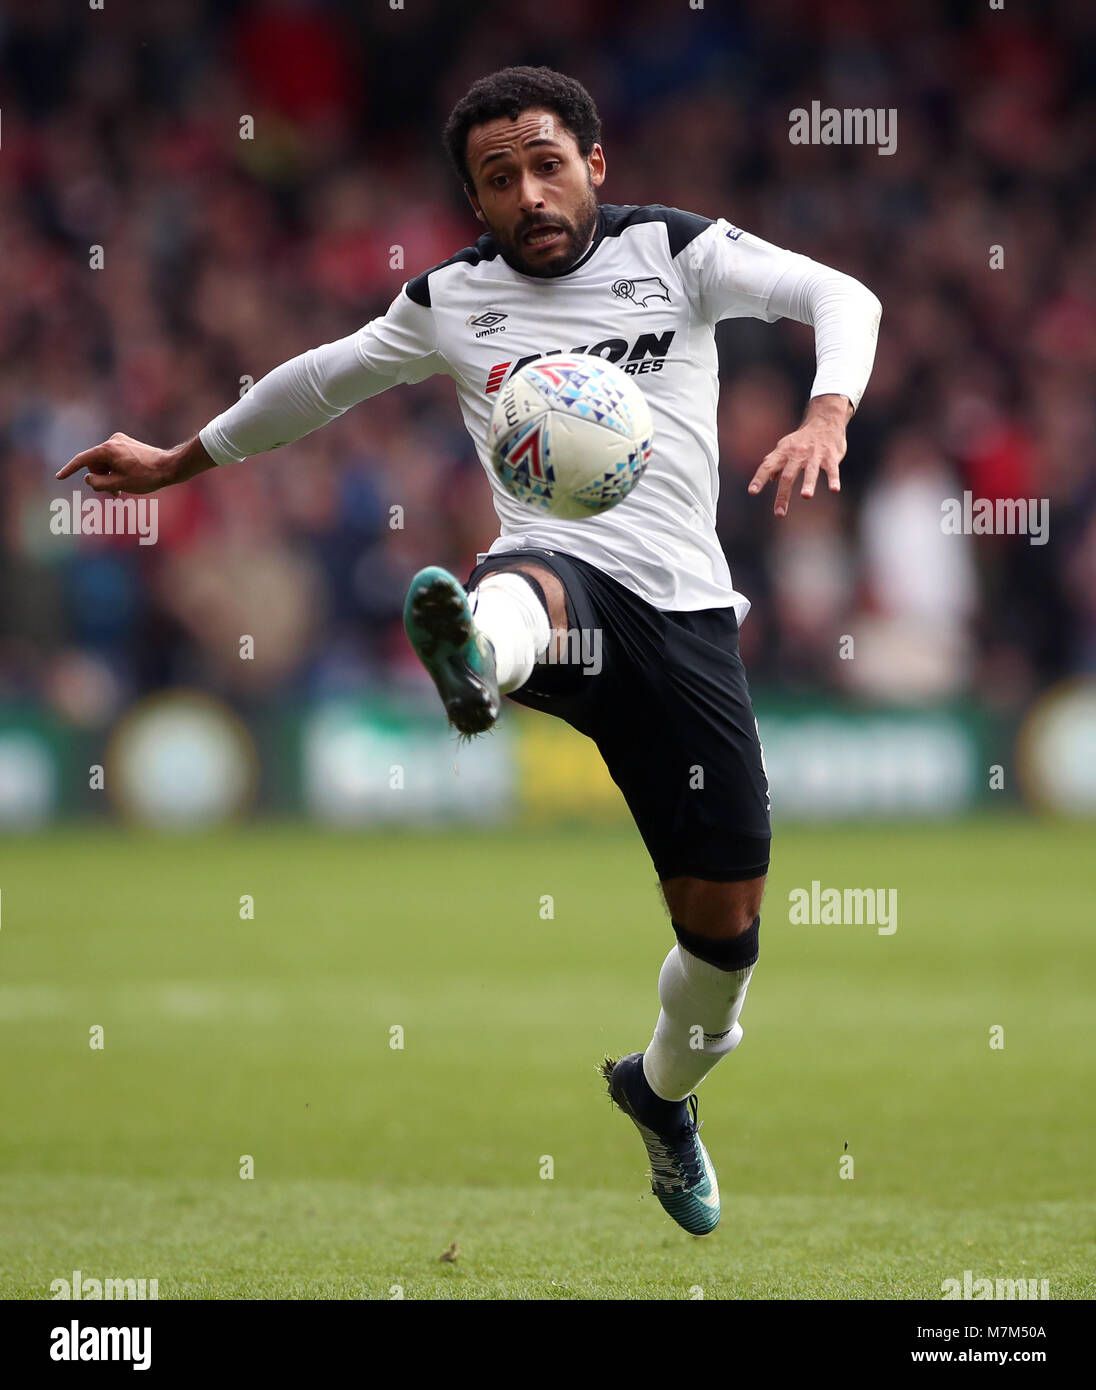 Derby County's Ikechi Anya during the Sky Bet Championship match at the City Ground, Nottingham. PRESS ASSOCIATION Photo. Picture date: Sunday March 11, 2018. See PA story SOCCER Forest. Photo credit should read: Nick Potts/PA Wire. RESTRICTIONS: No use with unauthorised audio, video, data, fixture lists, club/league logos or 'live' services. Online in-match use limited to 75 images, no video emulation. No use in betting, games or single club/league/player publications. Stock Photo